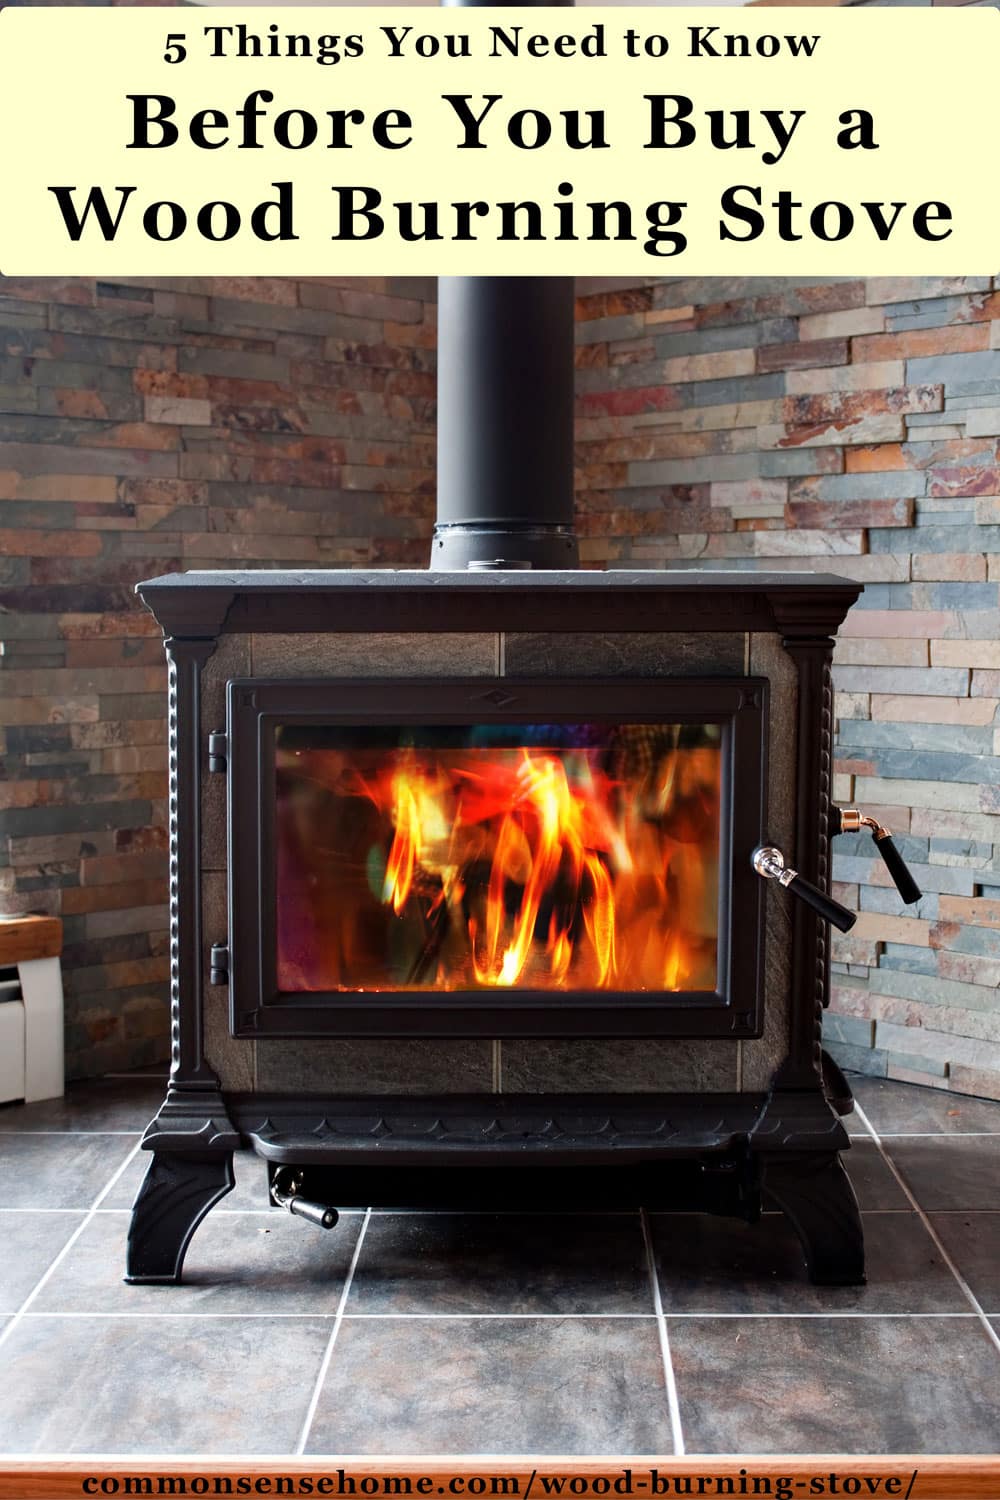 text "5 Things You Need to Know Before You Buy a Wood Burning Stove" with wood burning stove below